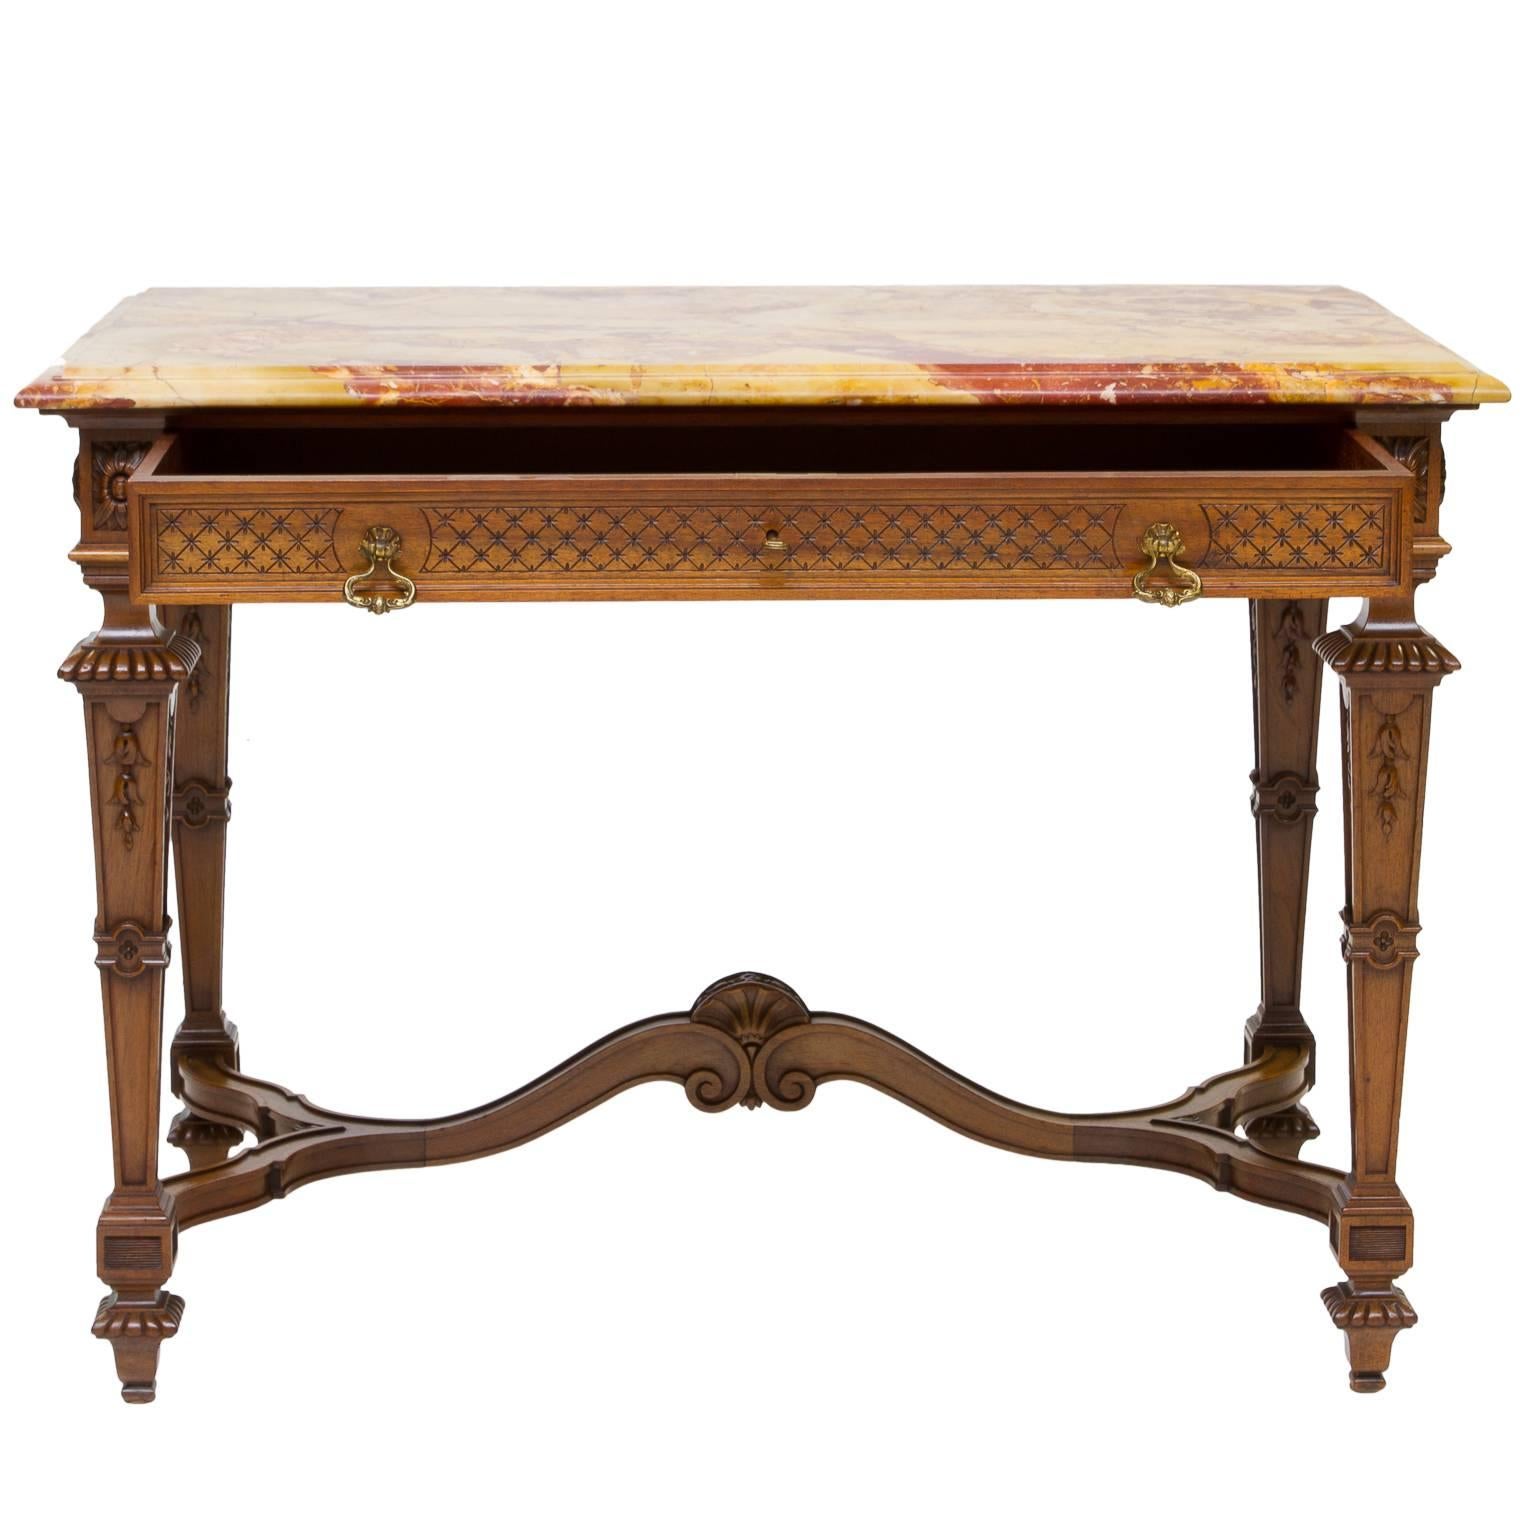 19th Century, French Renaissance style marble-top table with drawer. Made from French walnut wood and Brèche de Montmeyan marble. The apron has a single large drawer and two bronze decorative pulls. Notice the detail on the apron called diaper